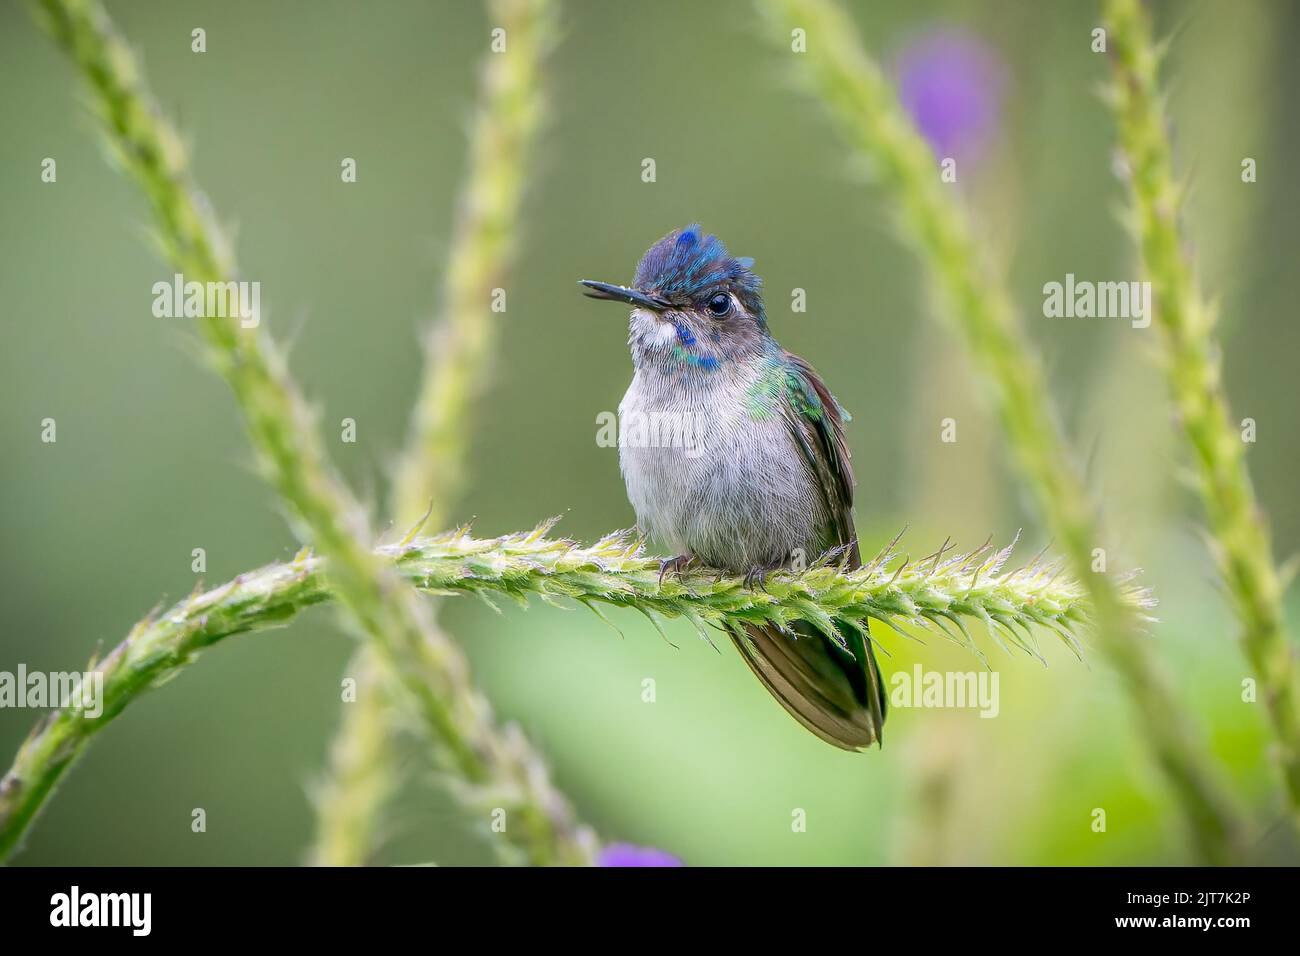 Violet-headed Hummingbird, Klais guimeti, perched on a Jamaica Vervain flower in Costa Rica Stock Photo